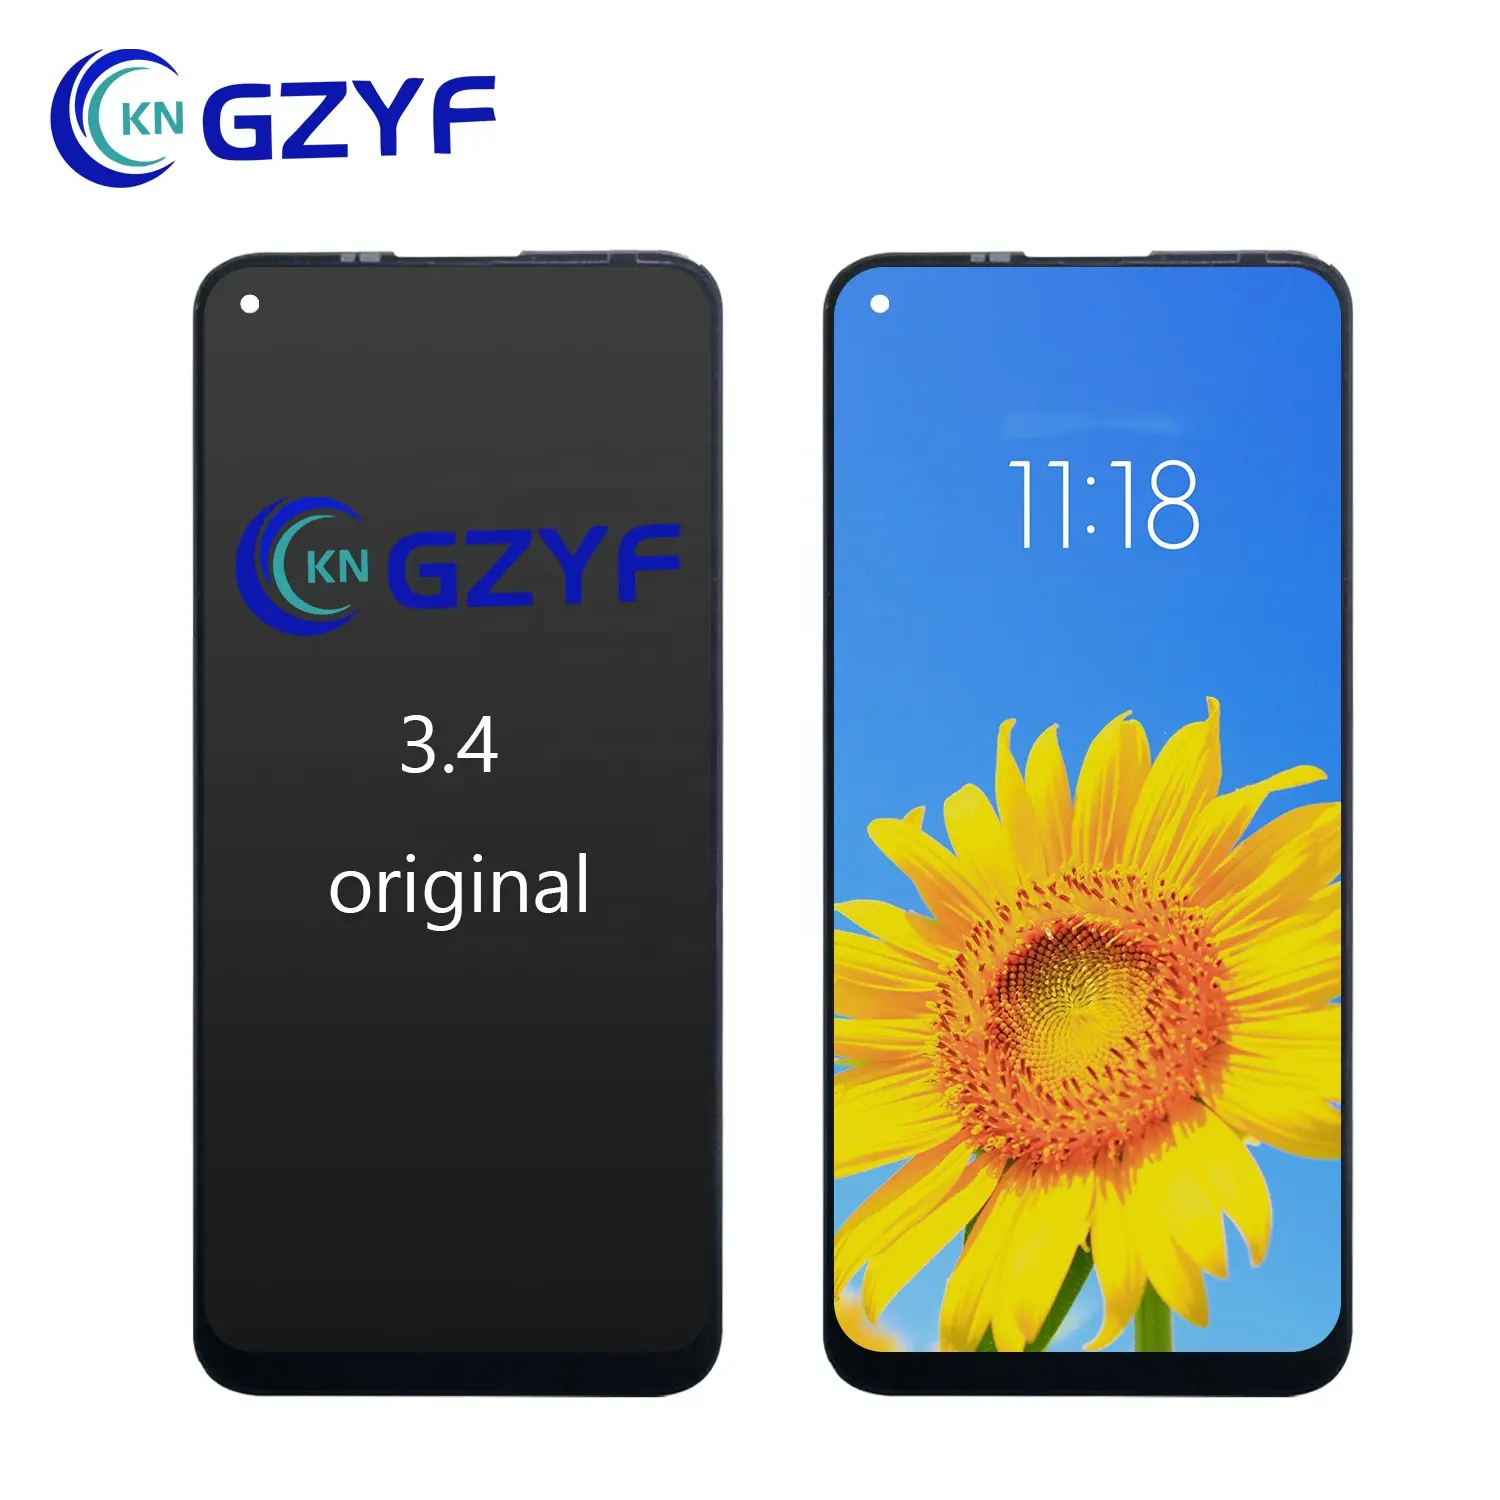 LCD For Nokia 3.4 display original touch screen Replacement Parts Wholesale mobile phone LCDs for tecno LCD for samsung KNGZYF